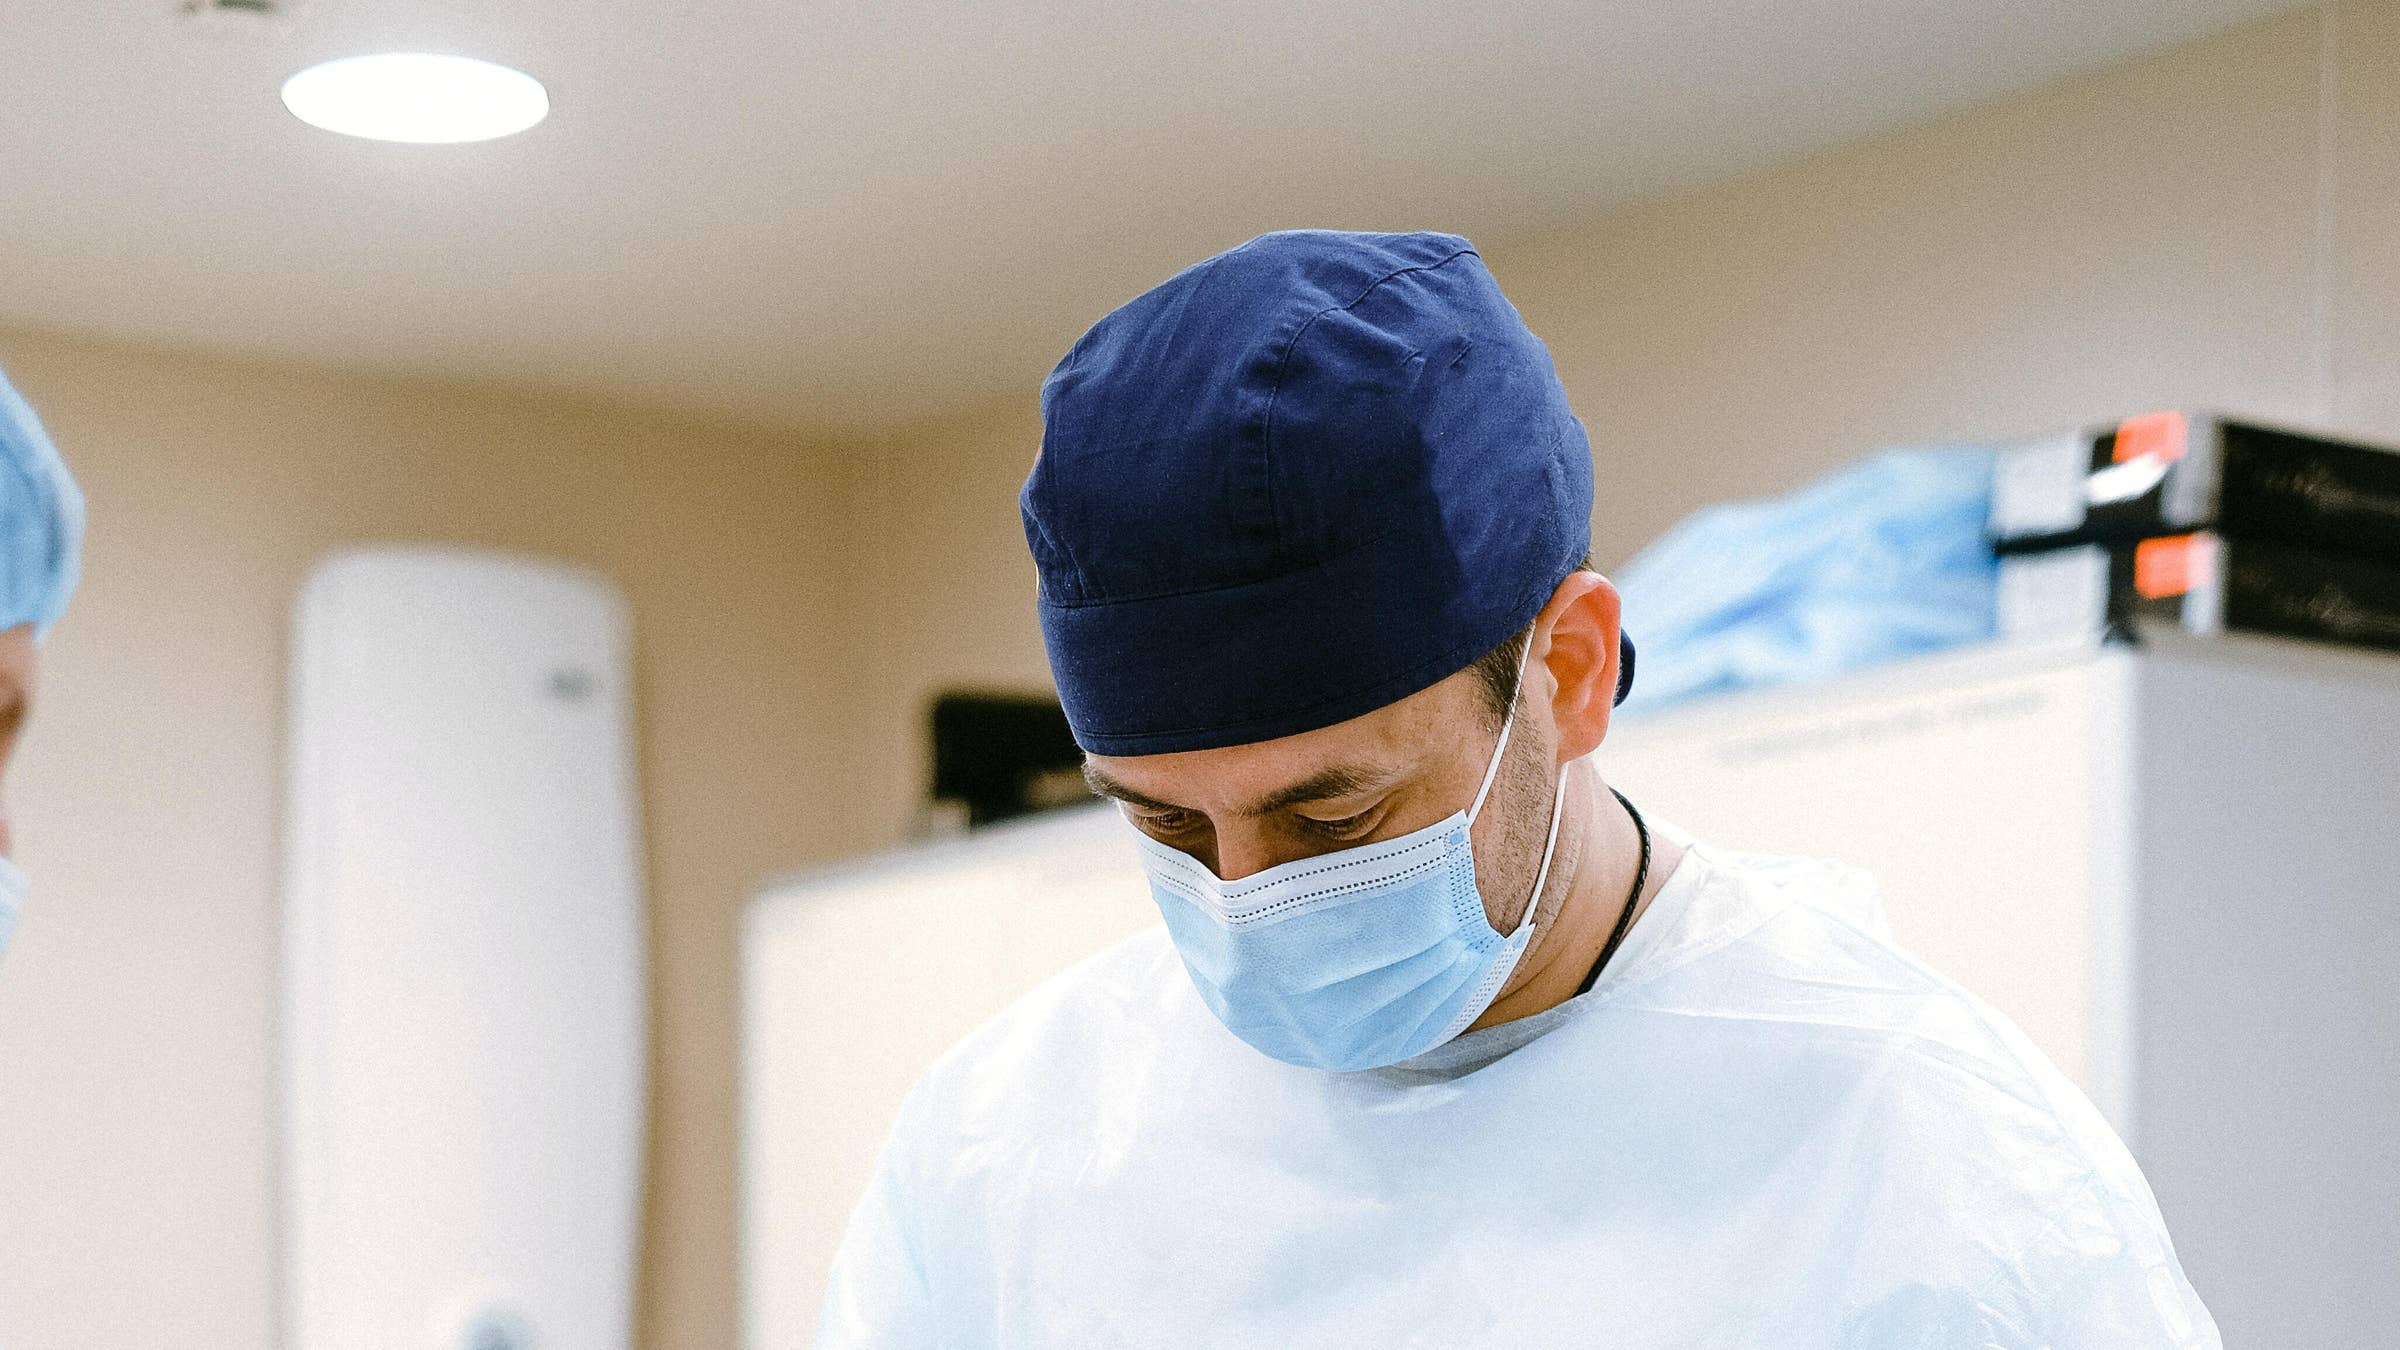 Is your plastic surgeon board certified? That's the first of many questions  to ask - ASPS